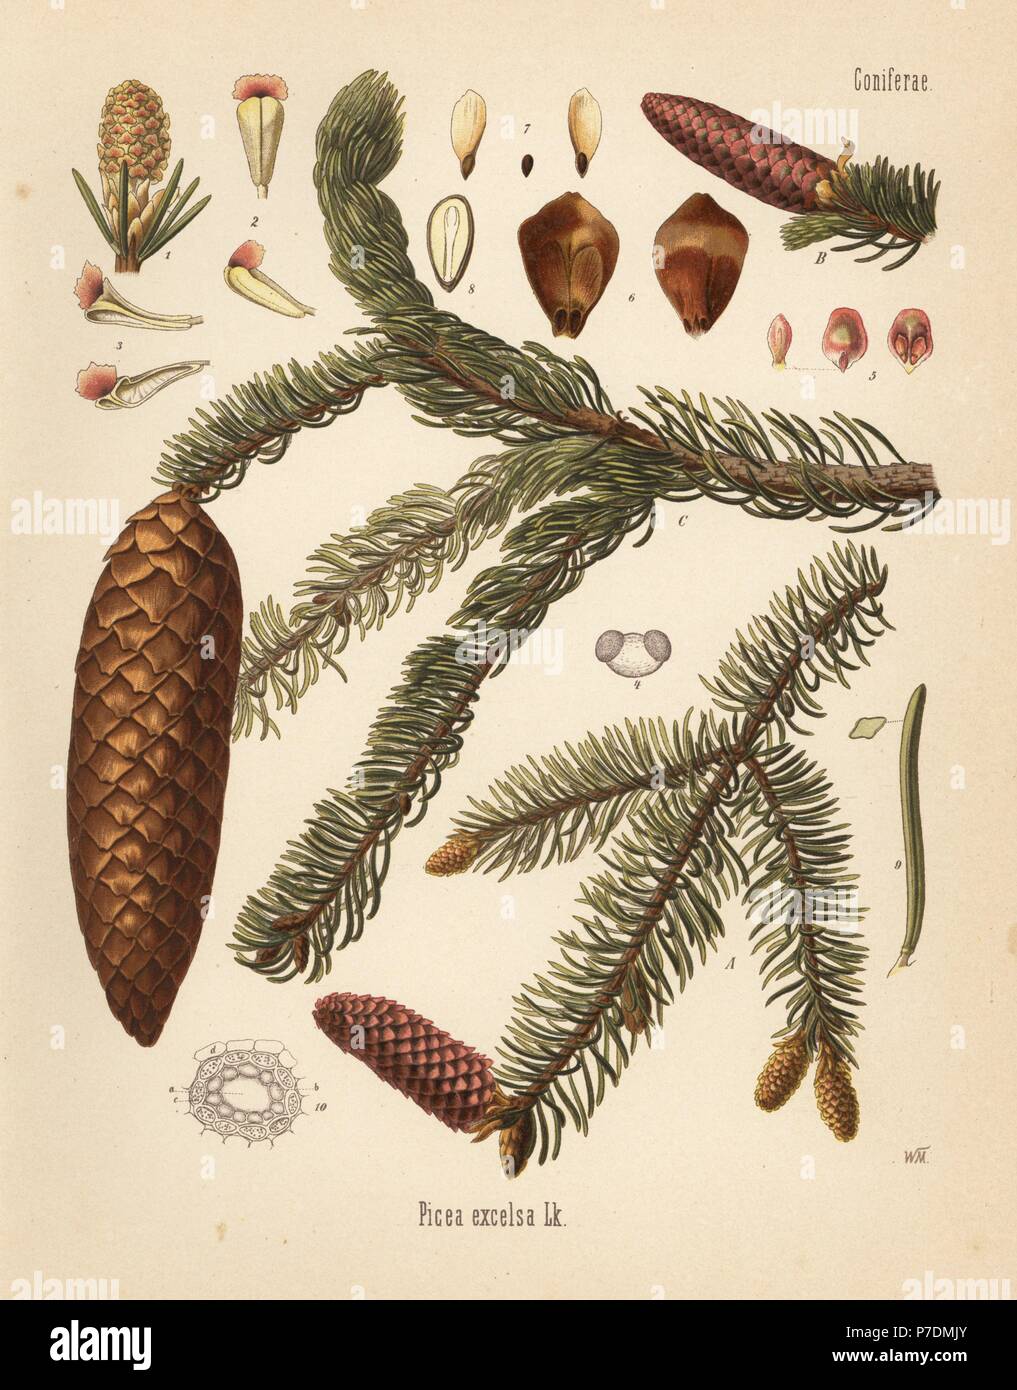 Norway spruce, Picea abies (Picea excelsa). Chromolithograph after a botanical illustration by Walther Muller from Hermann Adolph Koehler's Medicinal Plants, edited by Gustav Pabst, Koehler, Germany, 1887. Stock Photo